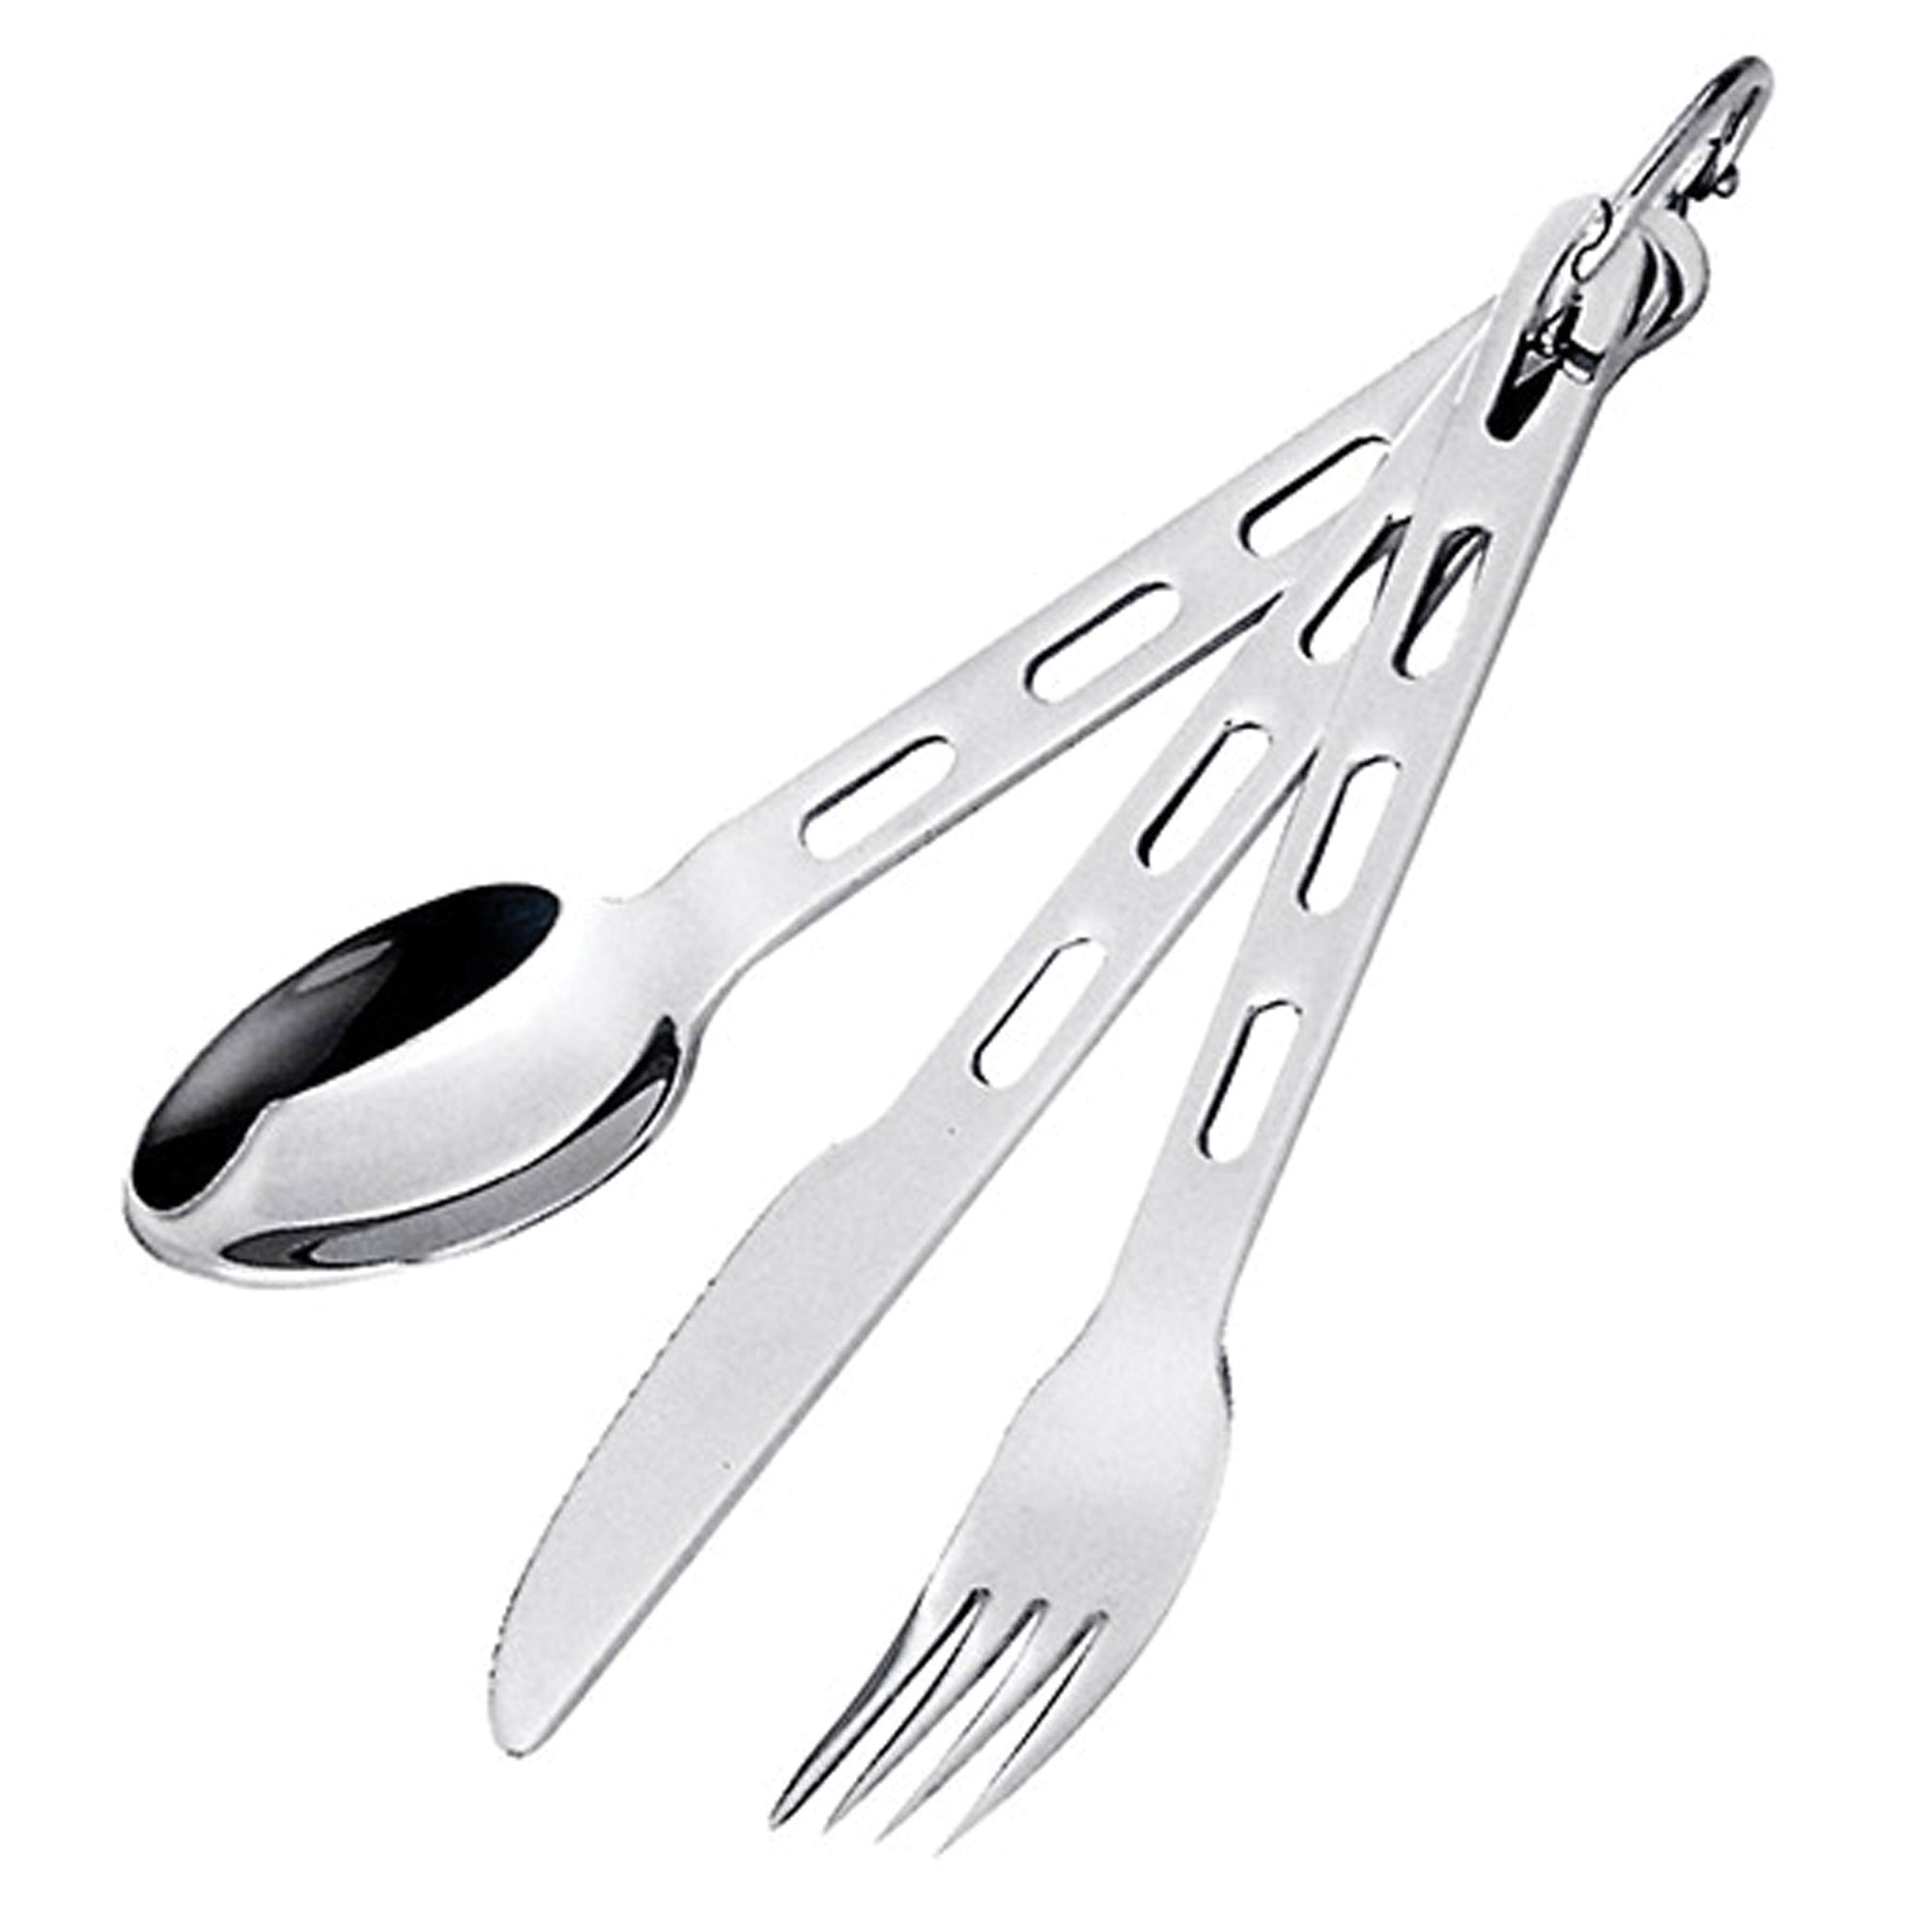 GSI Outdoors 61003 Glacier Stainless Steel Cutlery - 3-Piece Set